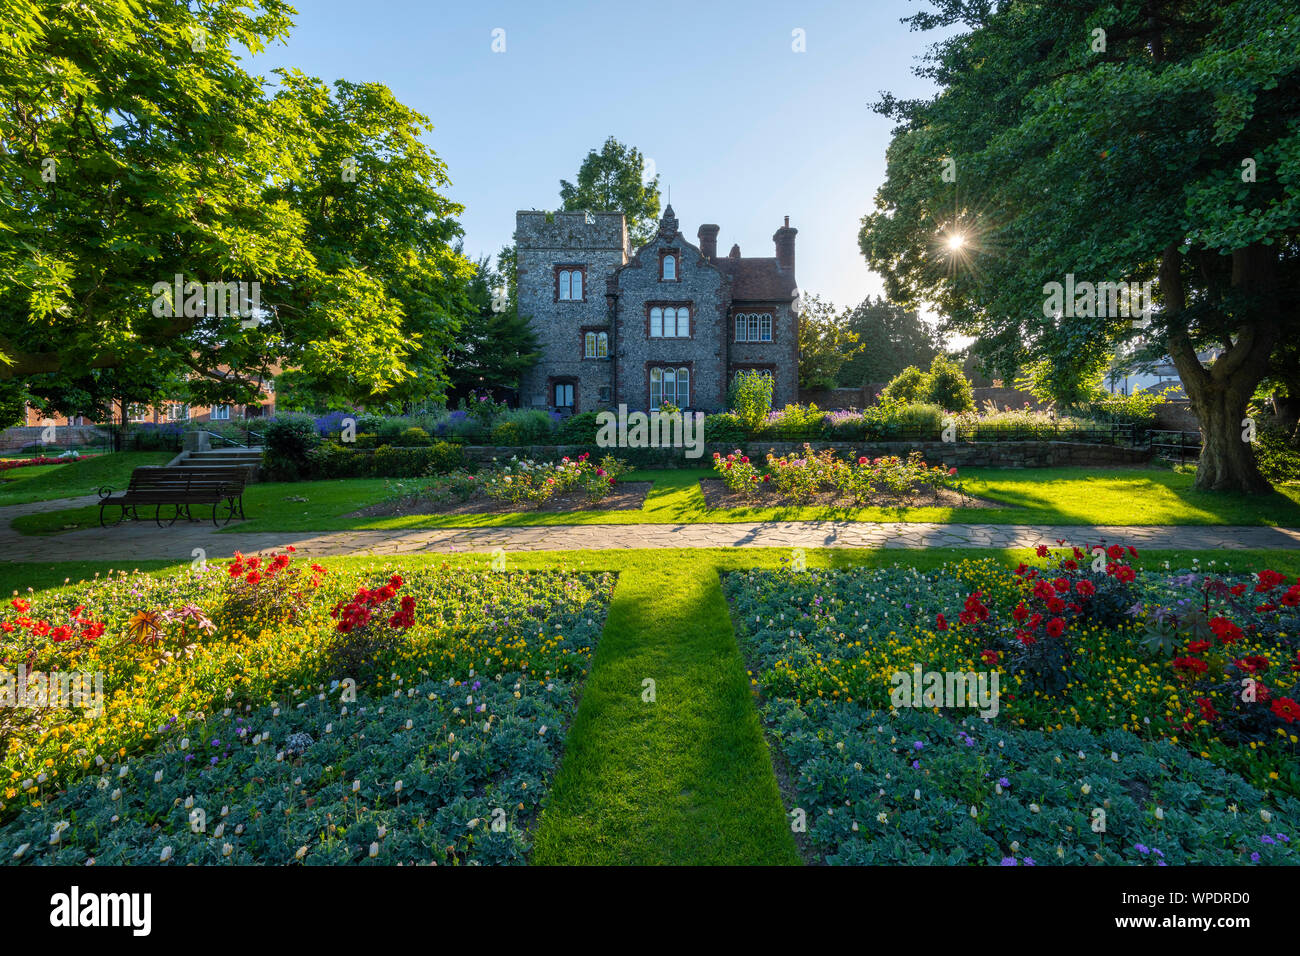 The Tower House in Westgate Gardens; a pretty public park in Canterbury, Kent. Stock Photo